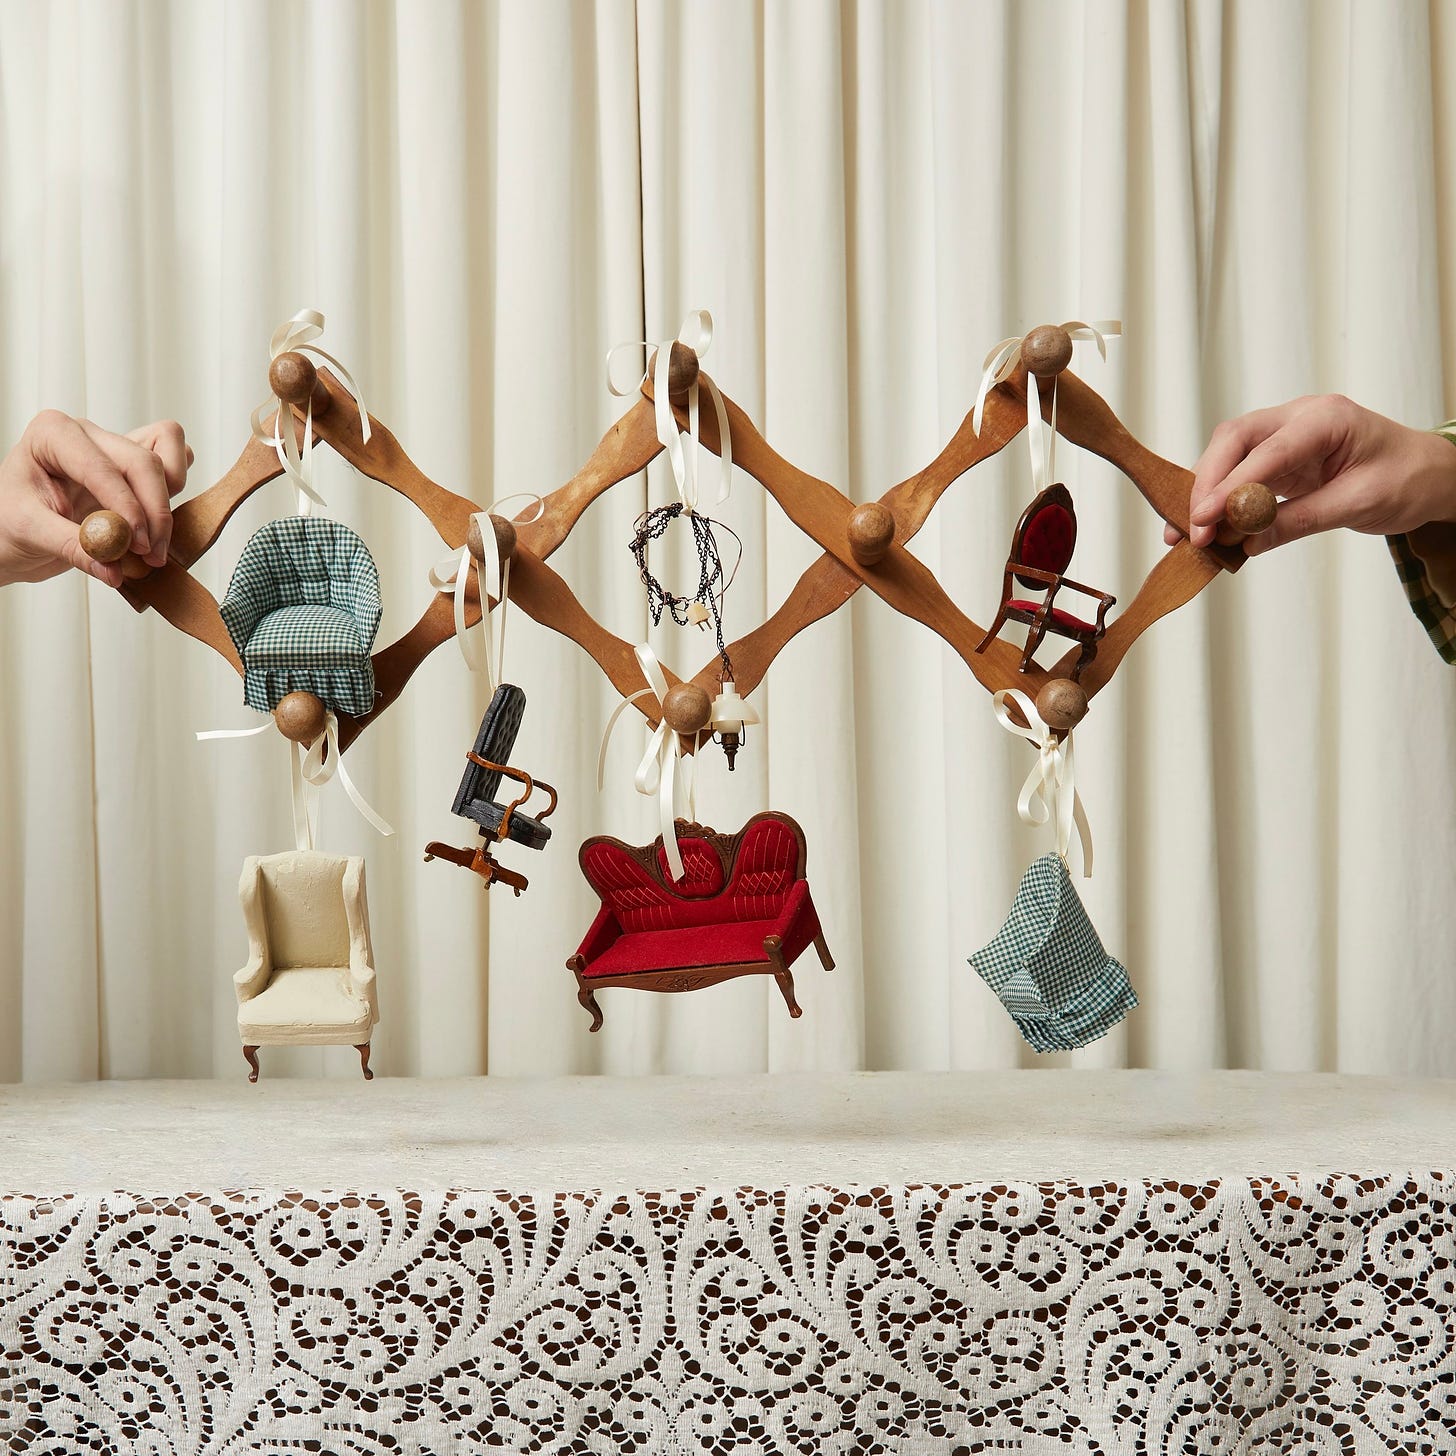 Assortment of ornaments made to resemble vintage chairs.